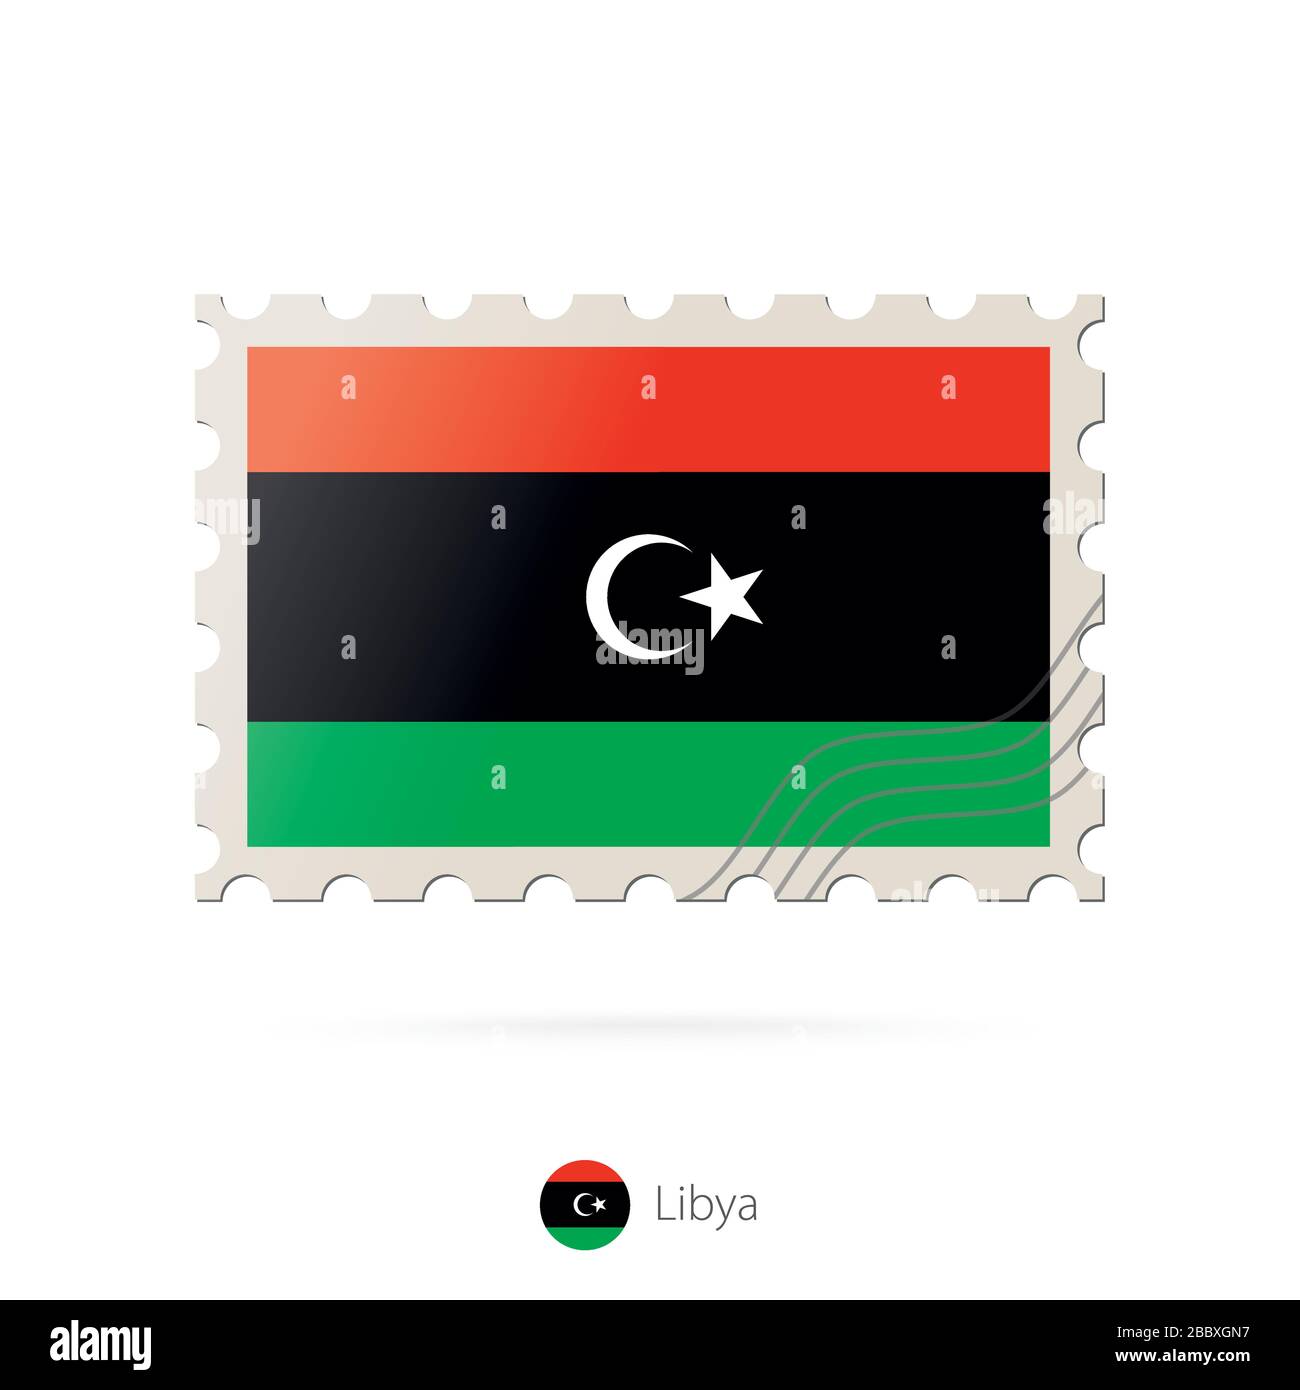 Postage stamp with the image of Libya flag. Libya Flag Postage on white background with shadow. Vector Illustration. Stock Vector